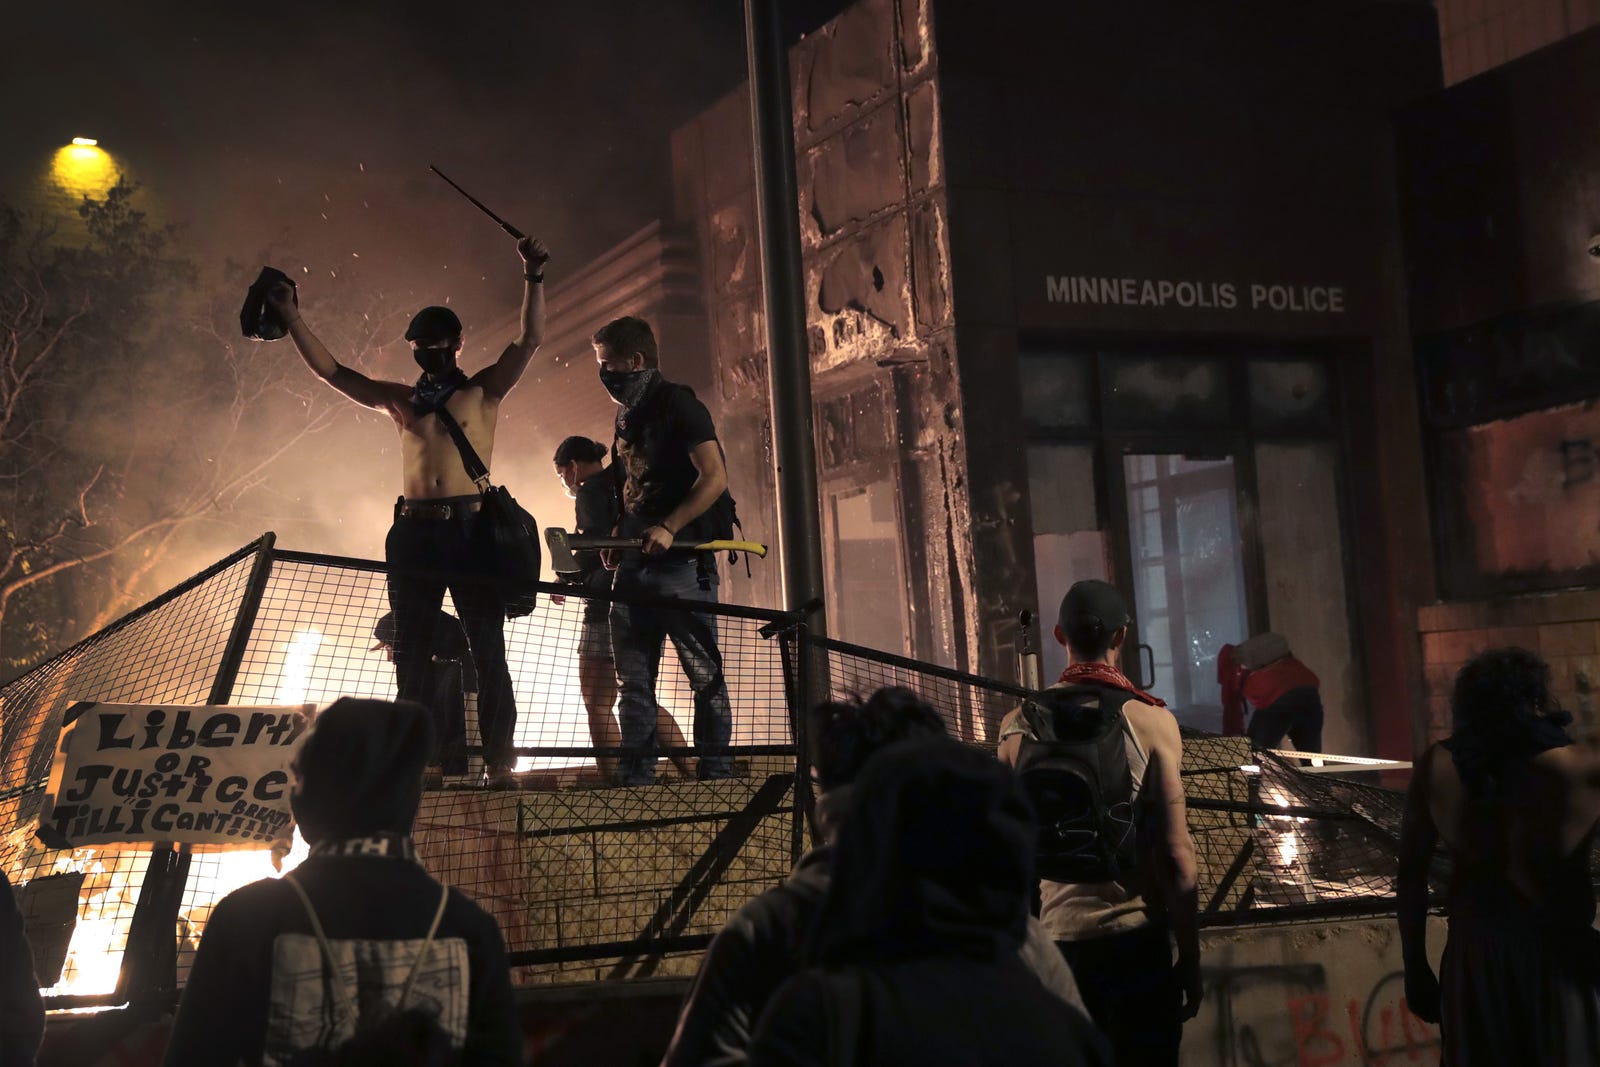 Protesters gather in front of the 3rd precinct police building while it burns on May 28, 2020 in Minneapolis, Minnesota.